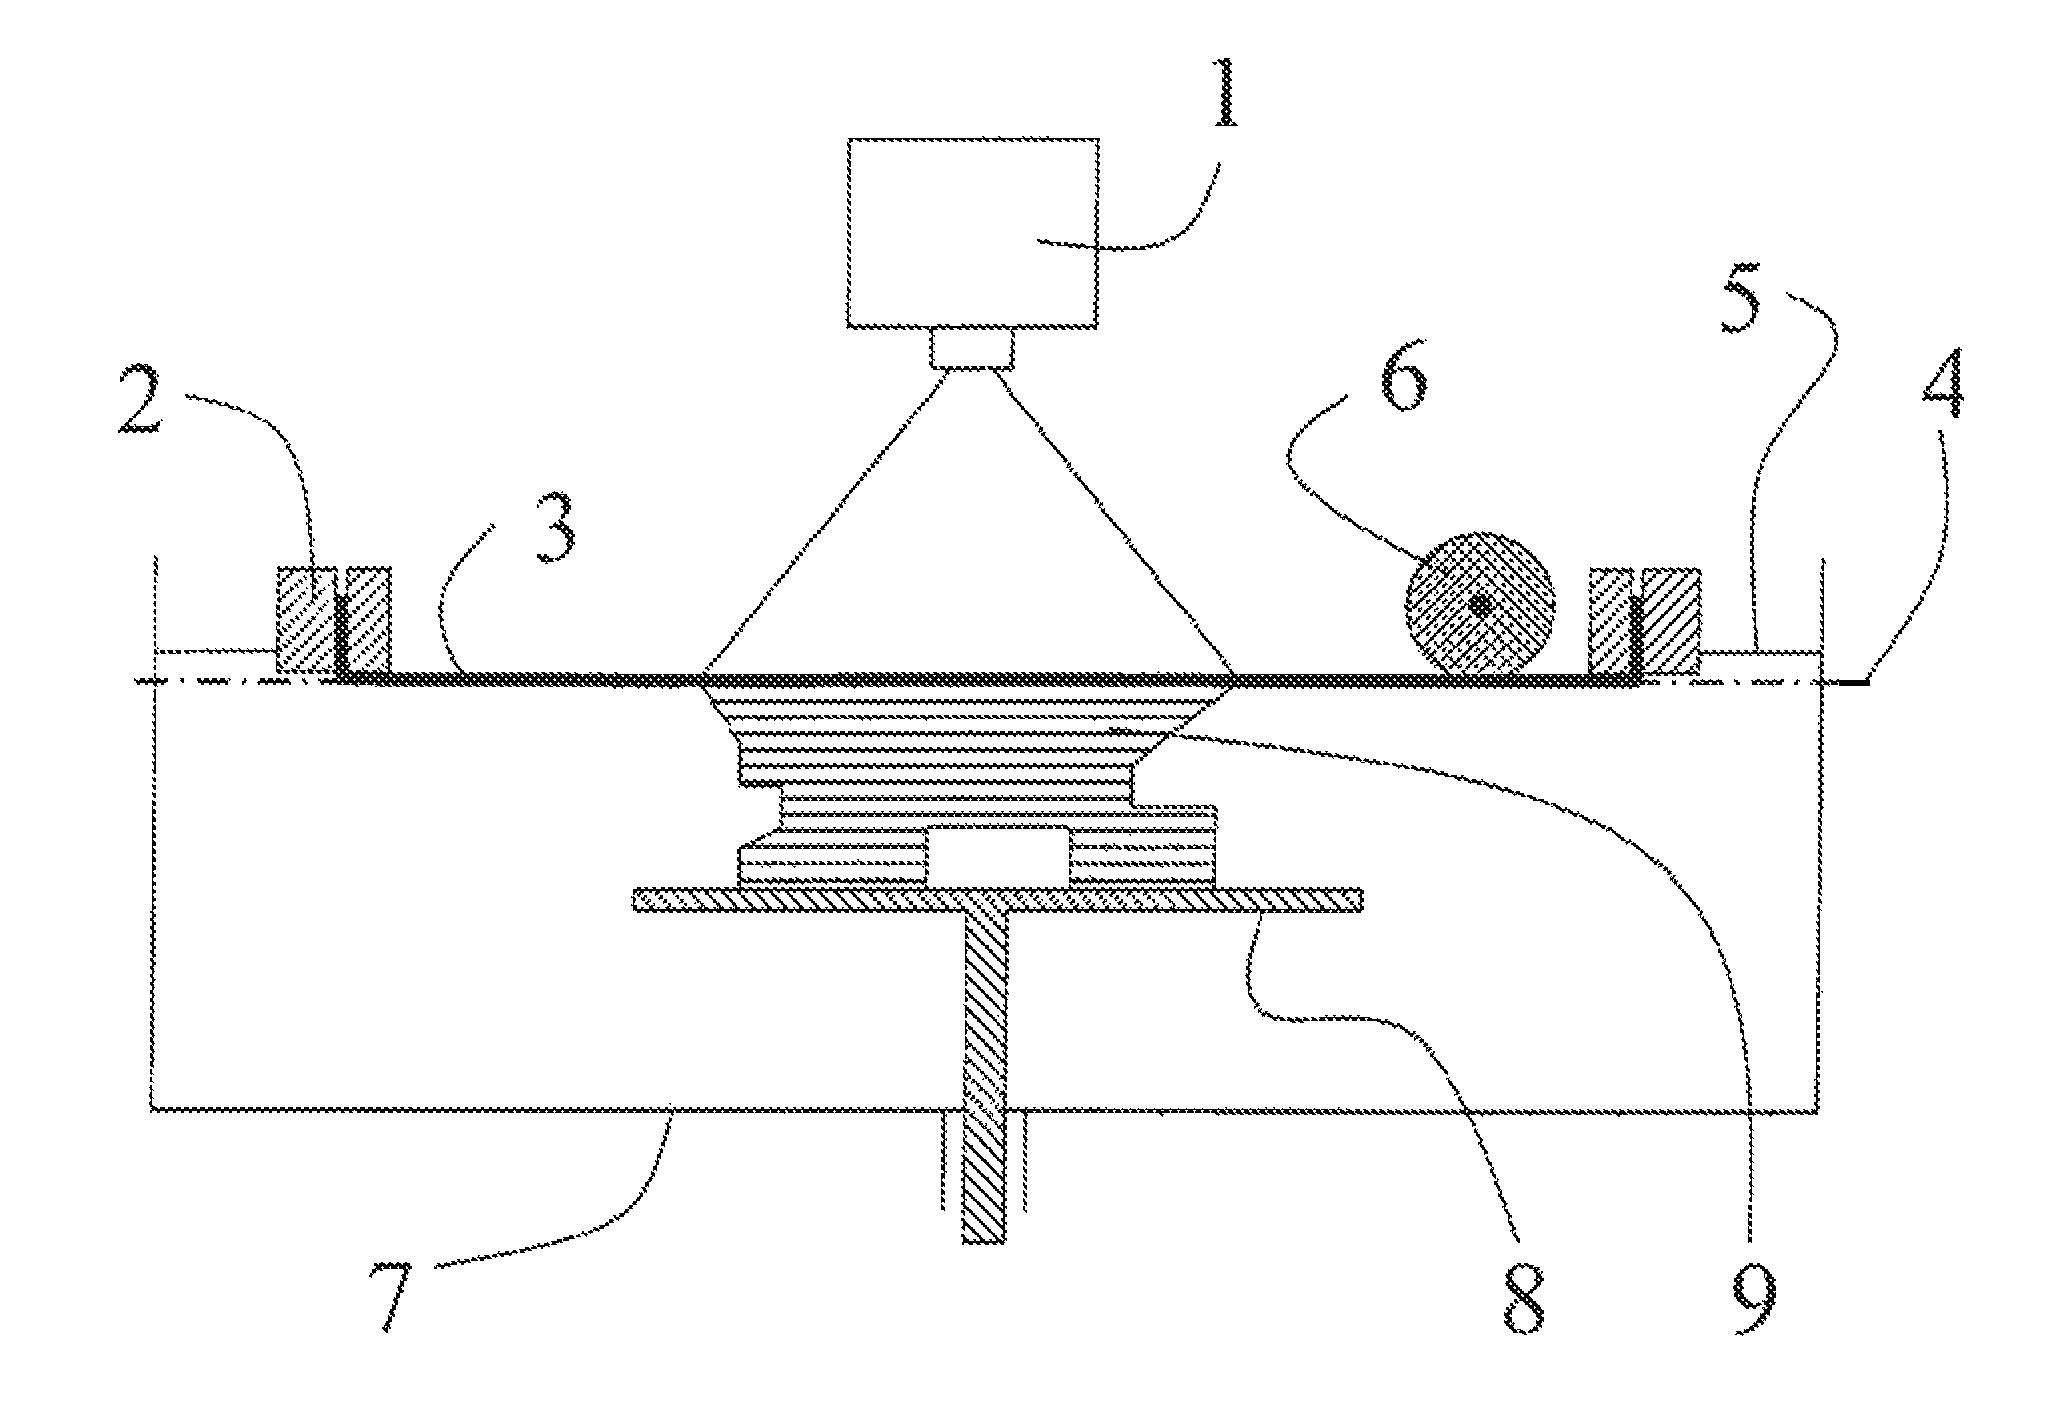 Process for the production of a three-dimensional object with an improved separation of hardened material layers from a construction plane